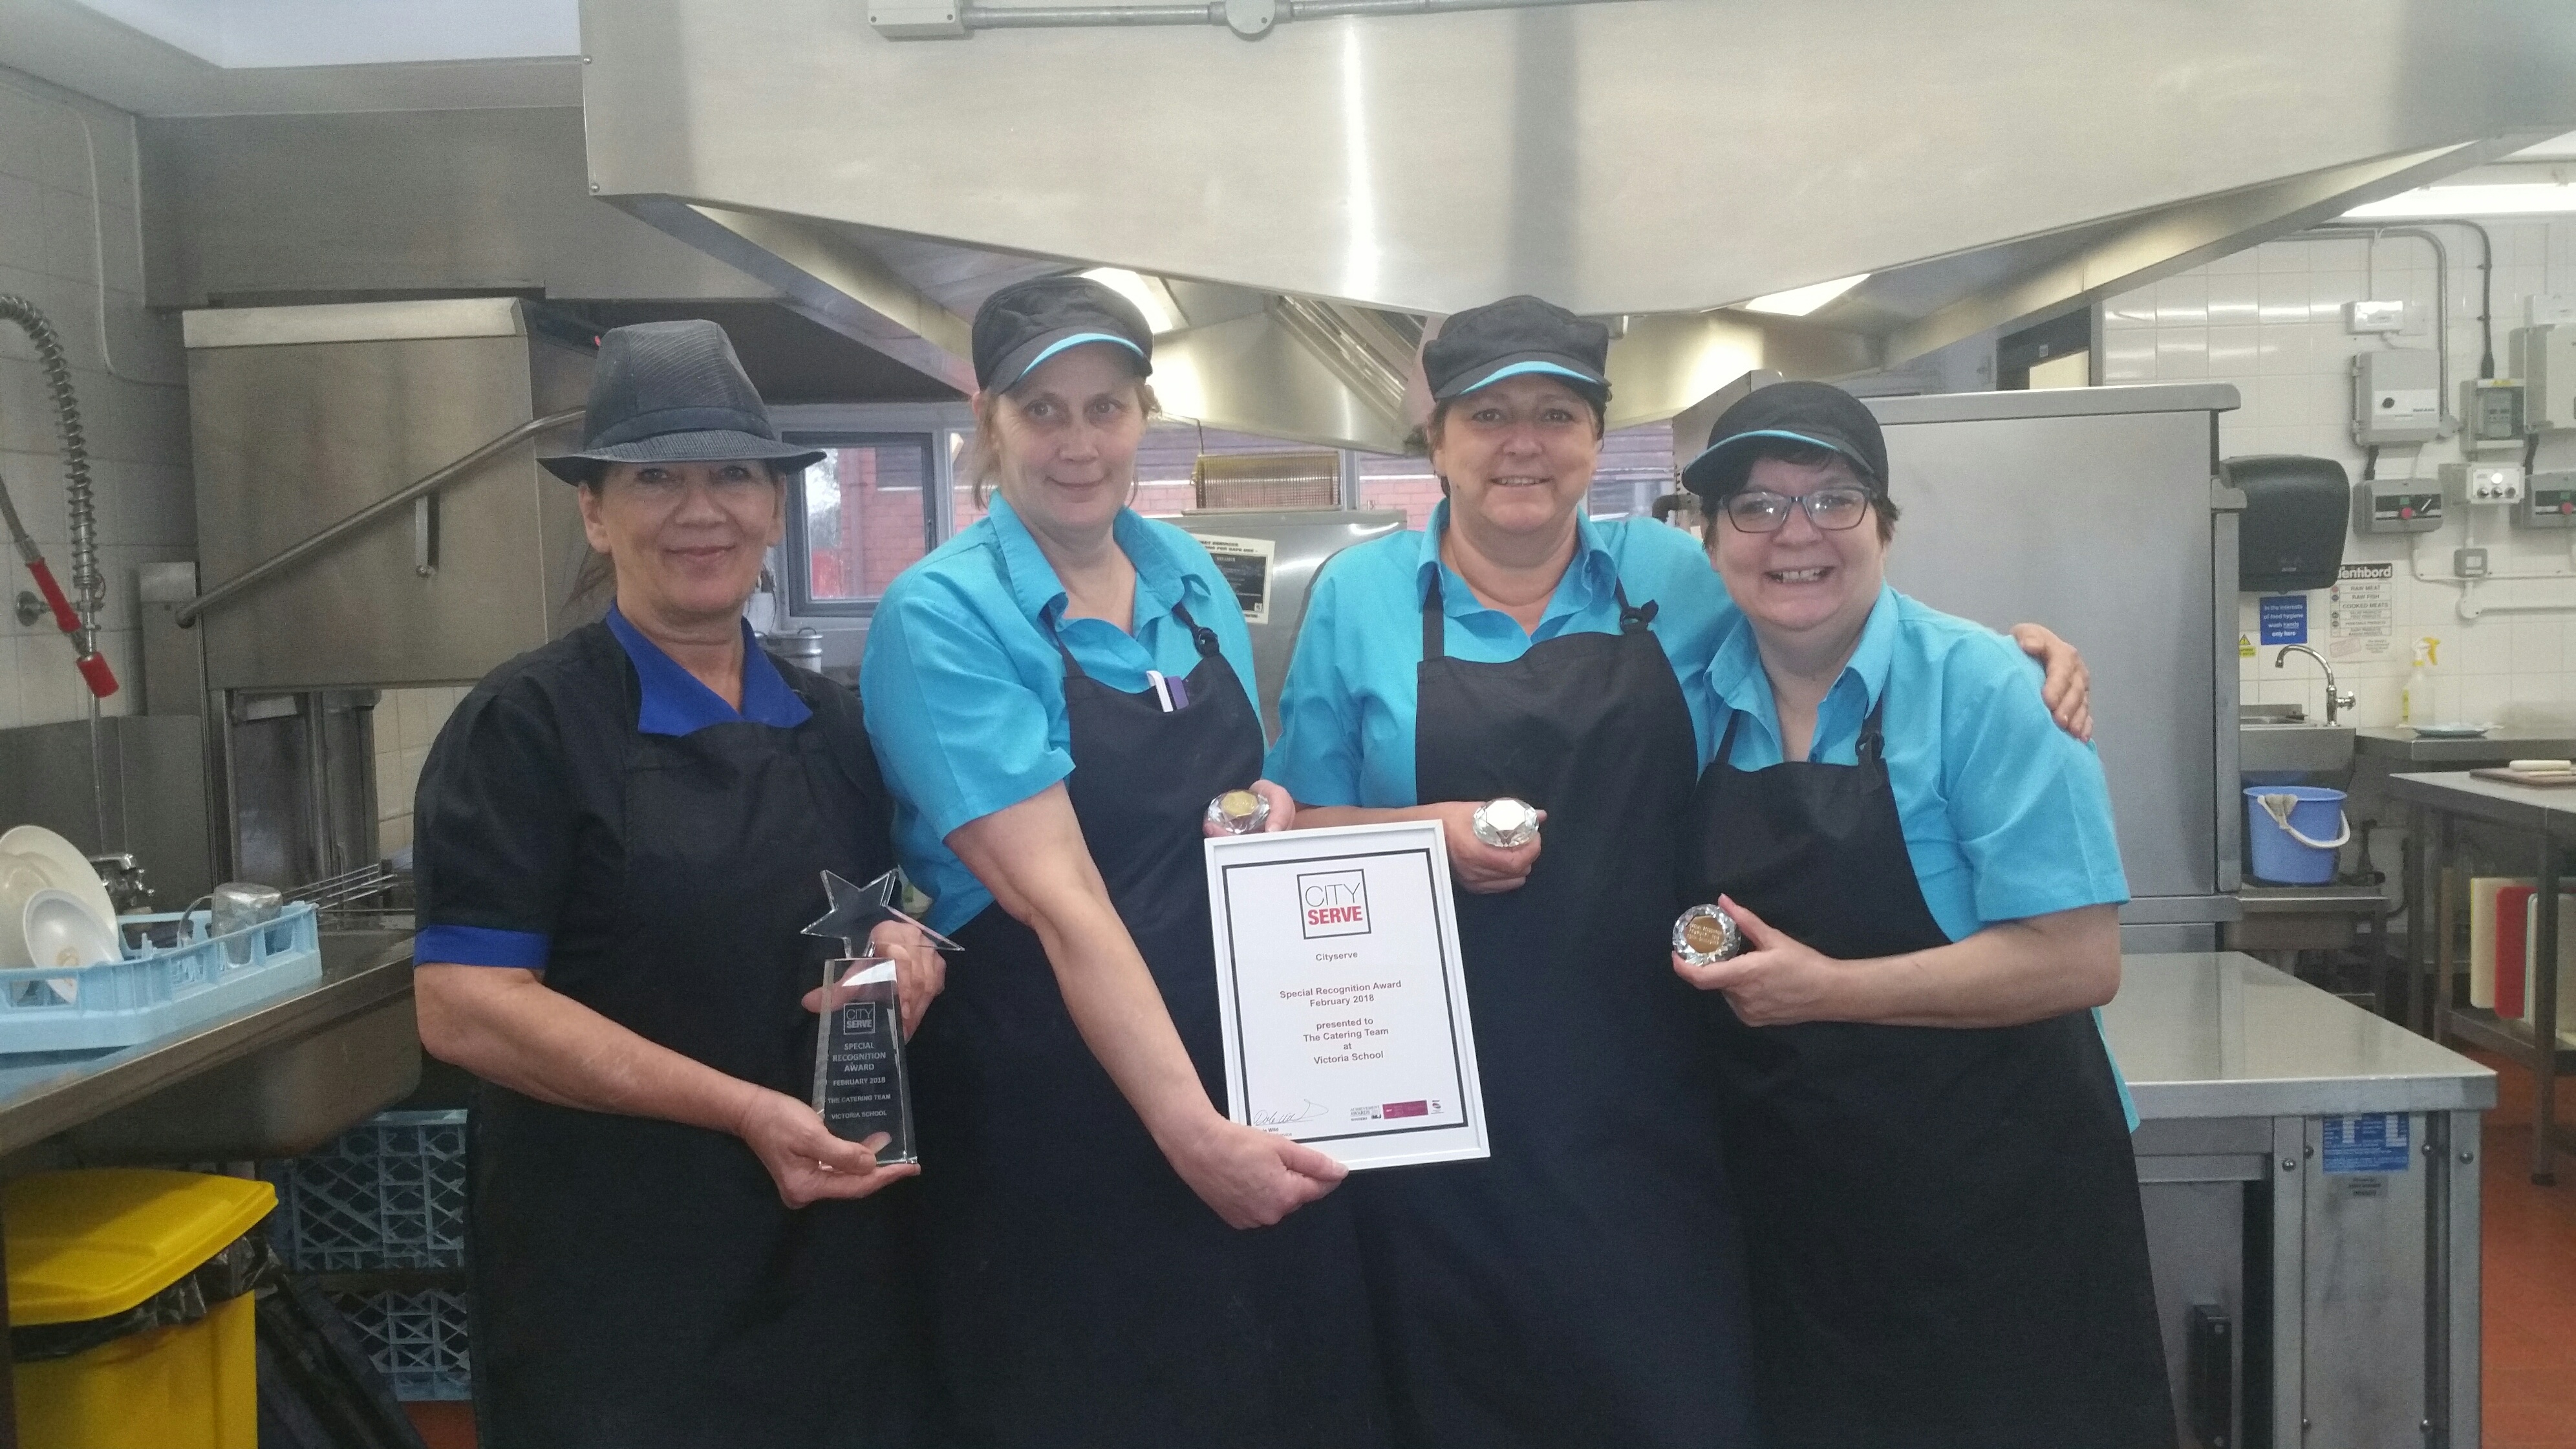 Congratulations to the Catering Team at Victoria School.